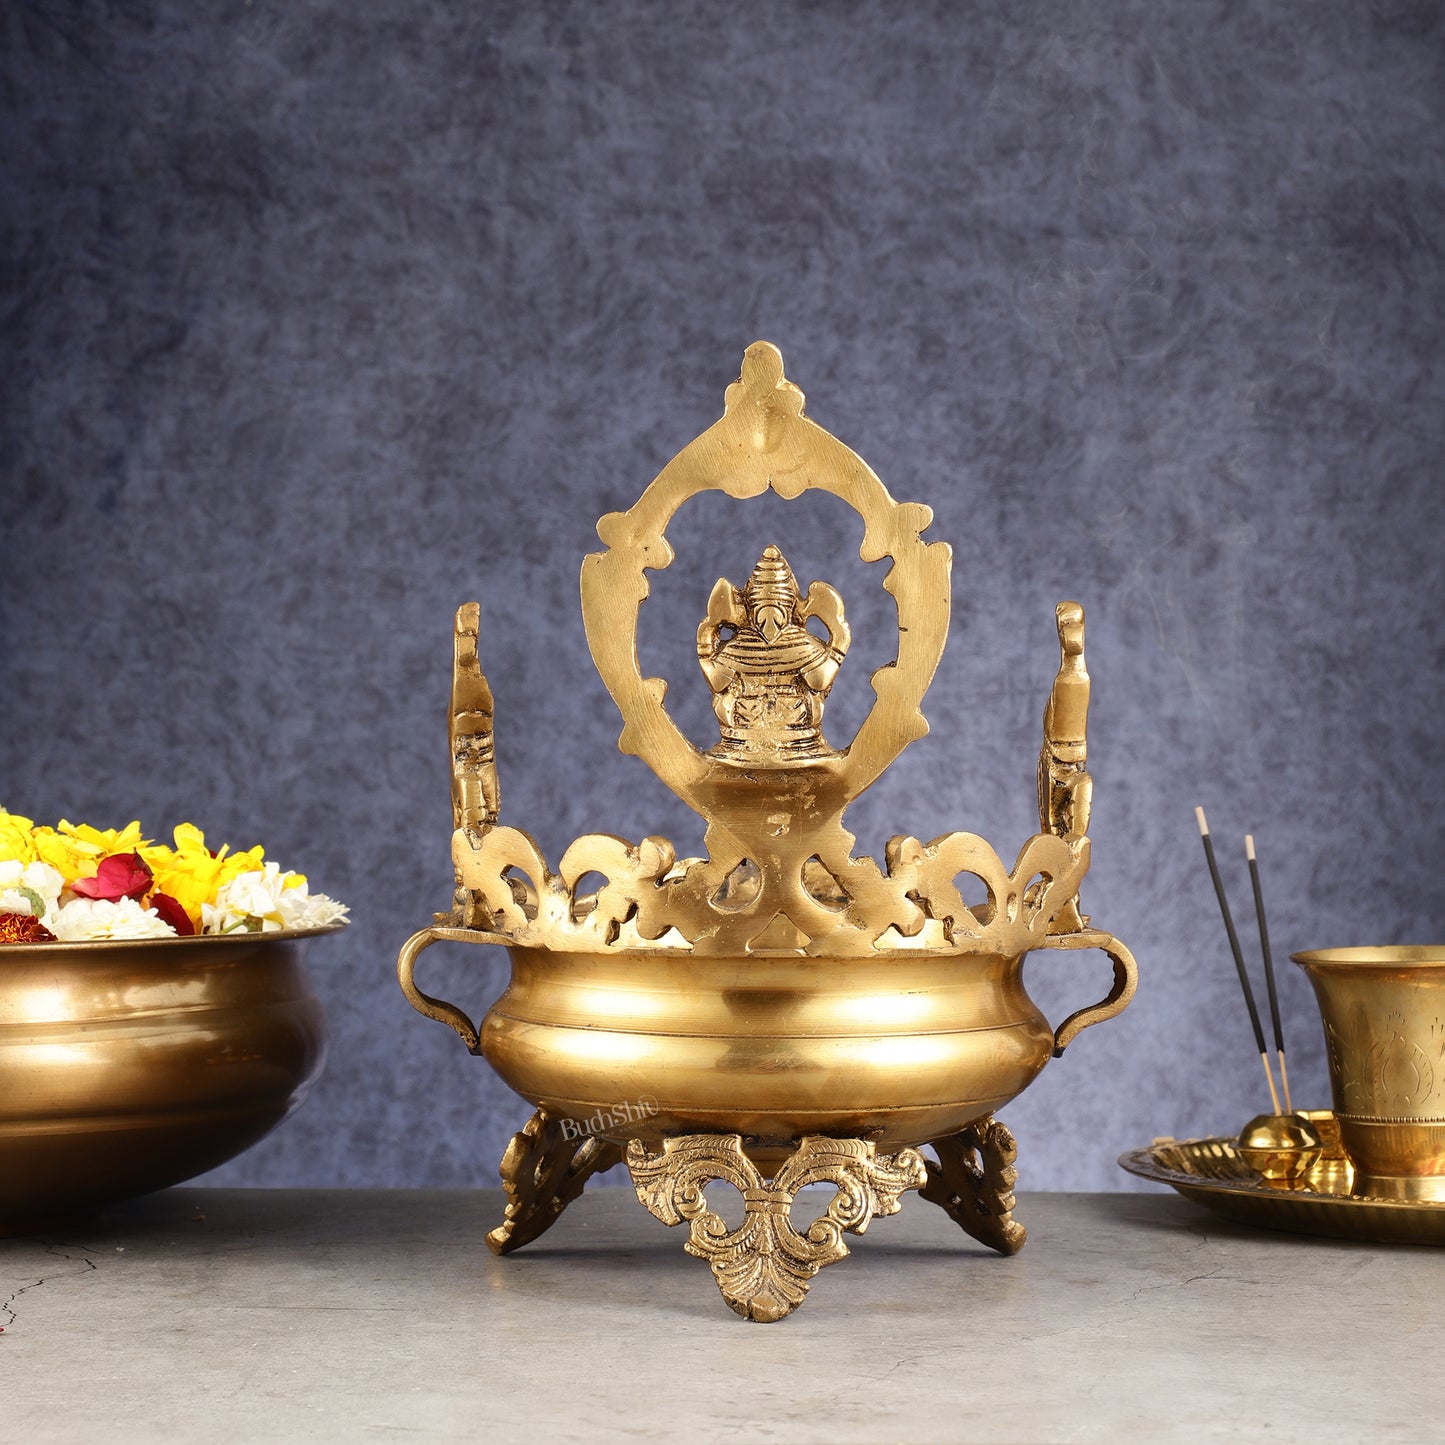 Handcrafted Brass Traditional Ganapati Urli Bowl with Elephants - 12-inch